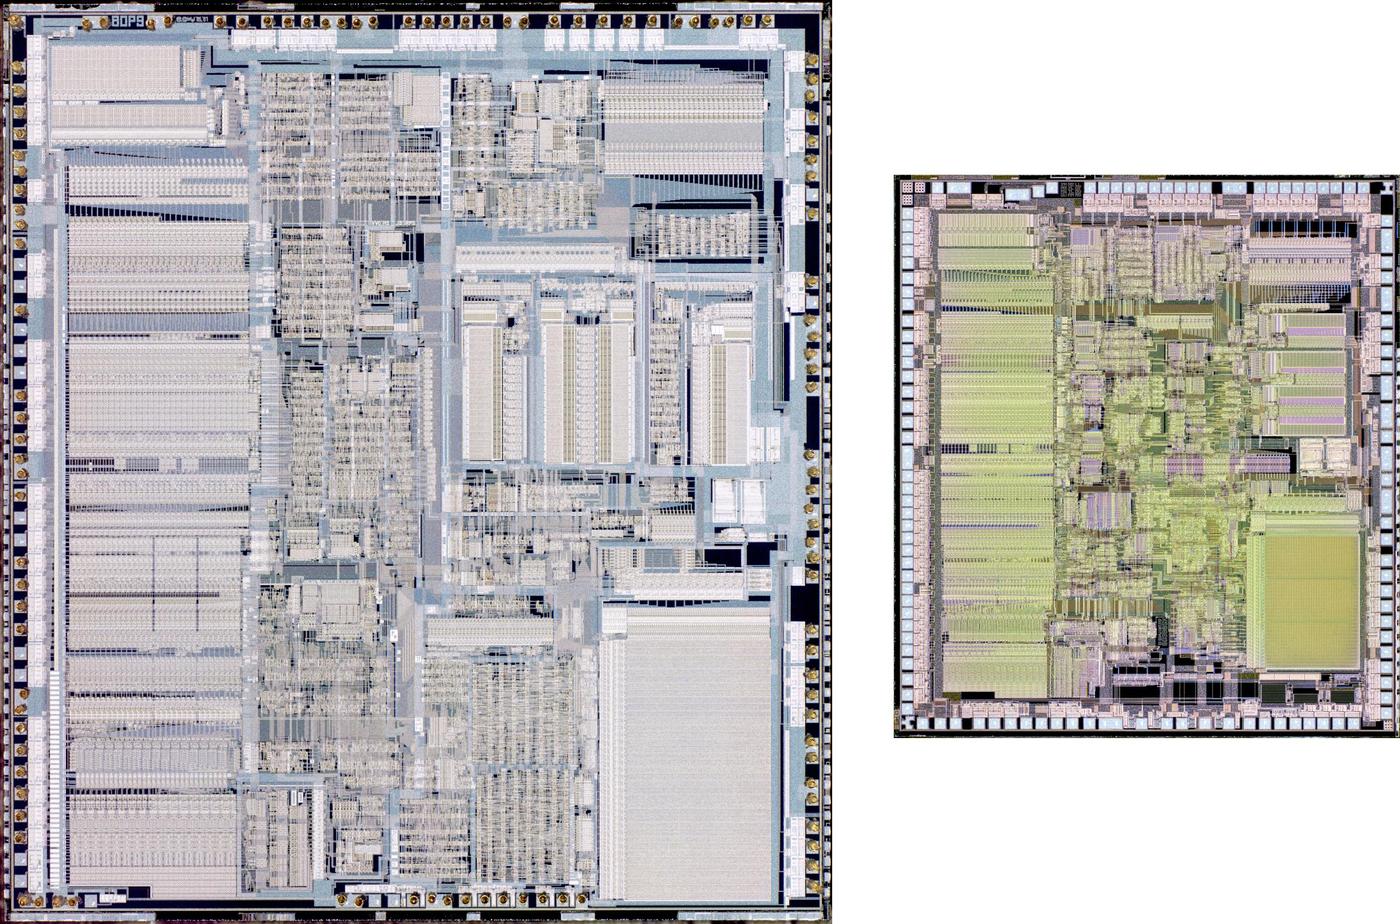 Comparison of two dies for the 386 SX. Photos courtesy of Antoine Bercovici.